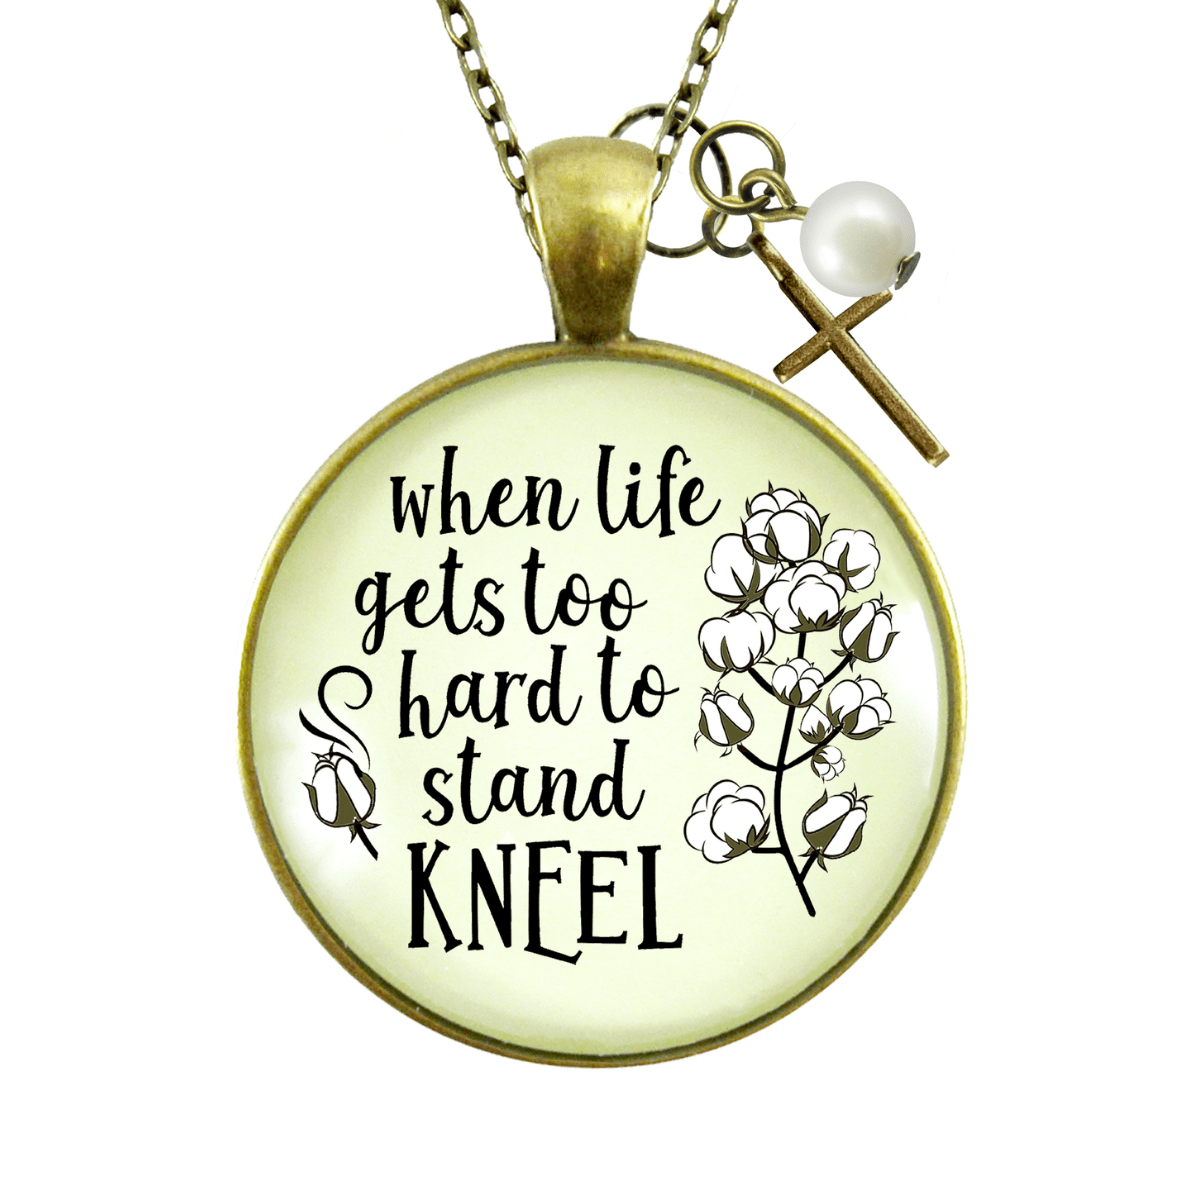 Gutsy Goodness Faith Necklace When Life Gets Hard Stand Kneel Country Cross Jewelry - Gutsy Goodness;Faith Necklace When Life Gets Hard Stand Kneel Country Cross Jewelry - Gutsy Goodness Handmade Jewelry Gifts